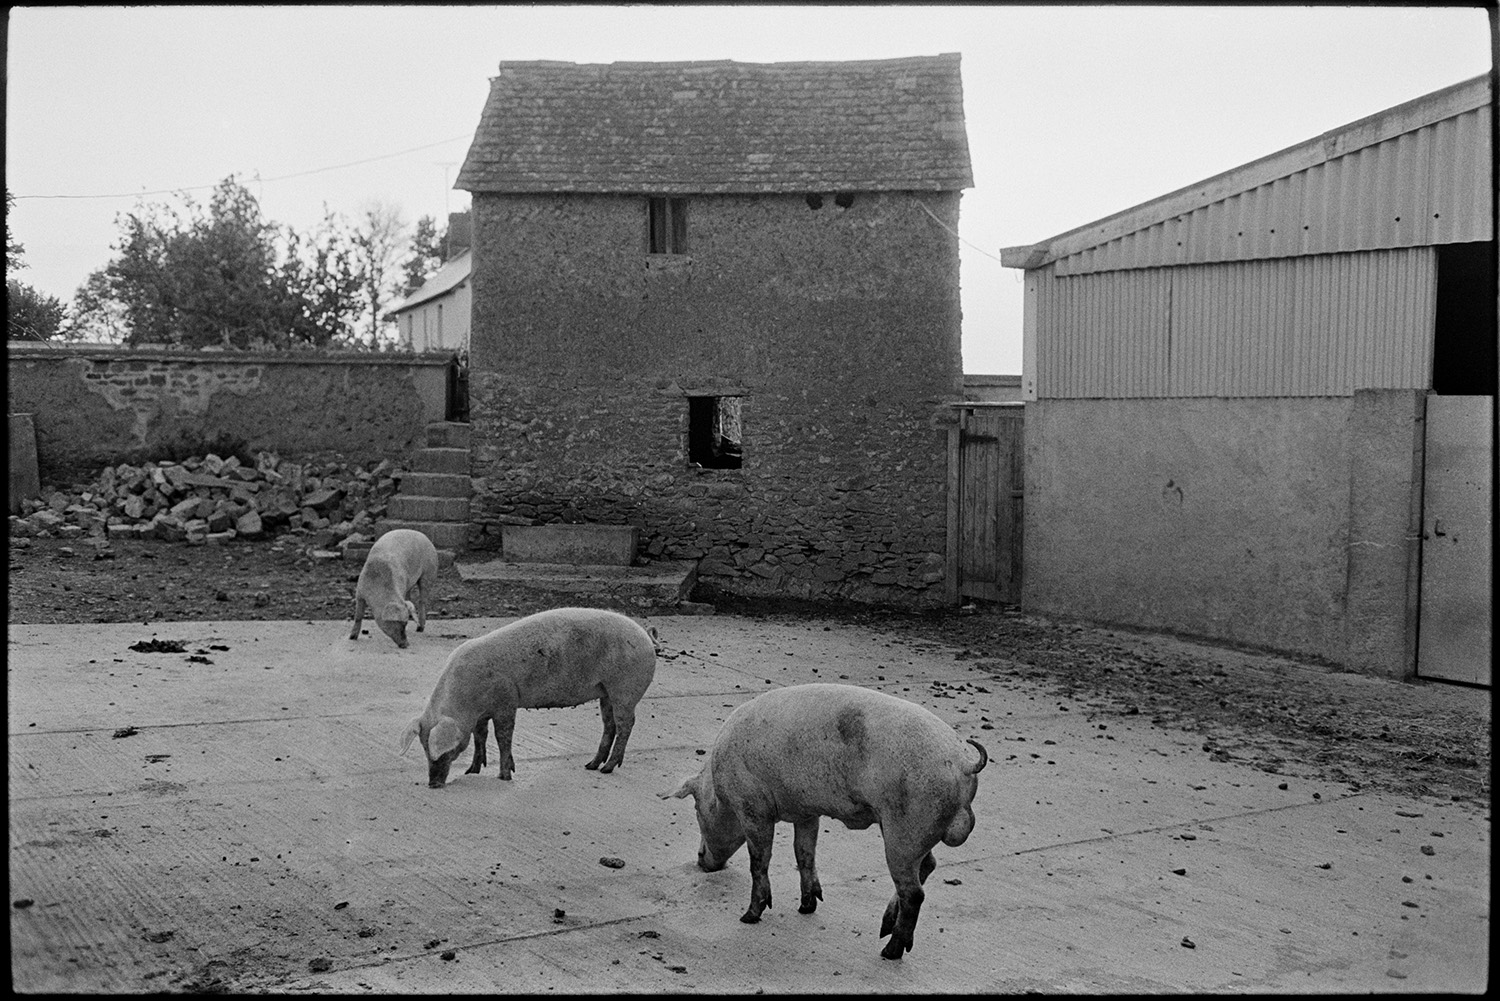 Pigs and cows in farmyard with cob barn. 
[Three pigs in the farmyard at Parsonage, Iddesleigh. A cob, stone and tiled barn can be seen in the background, next to a corrugated iron barn.]